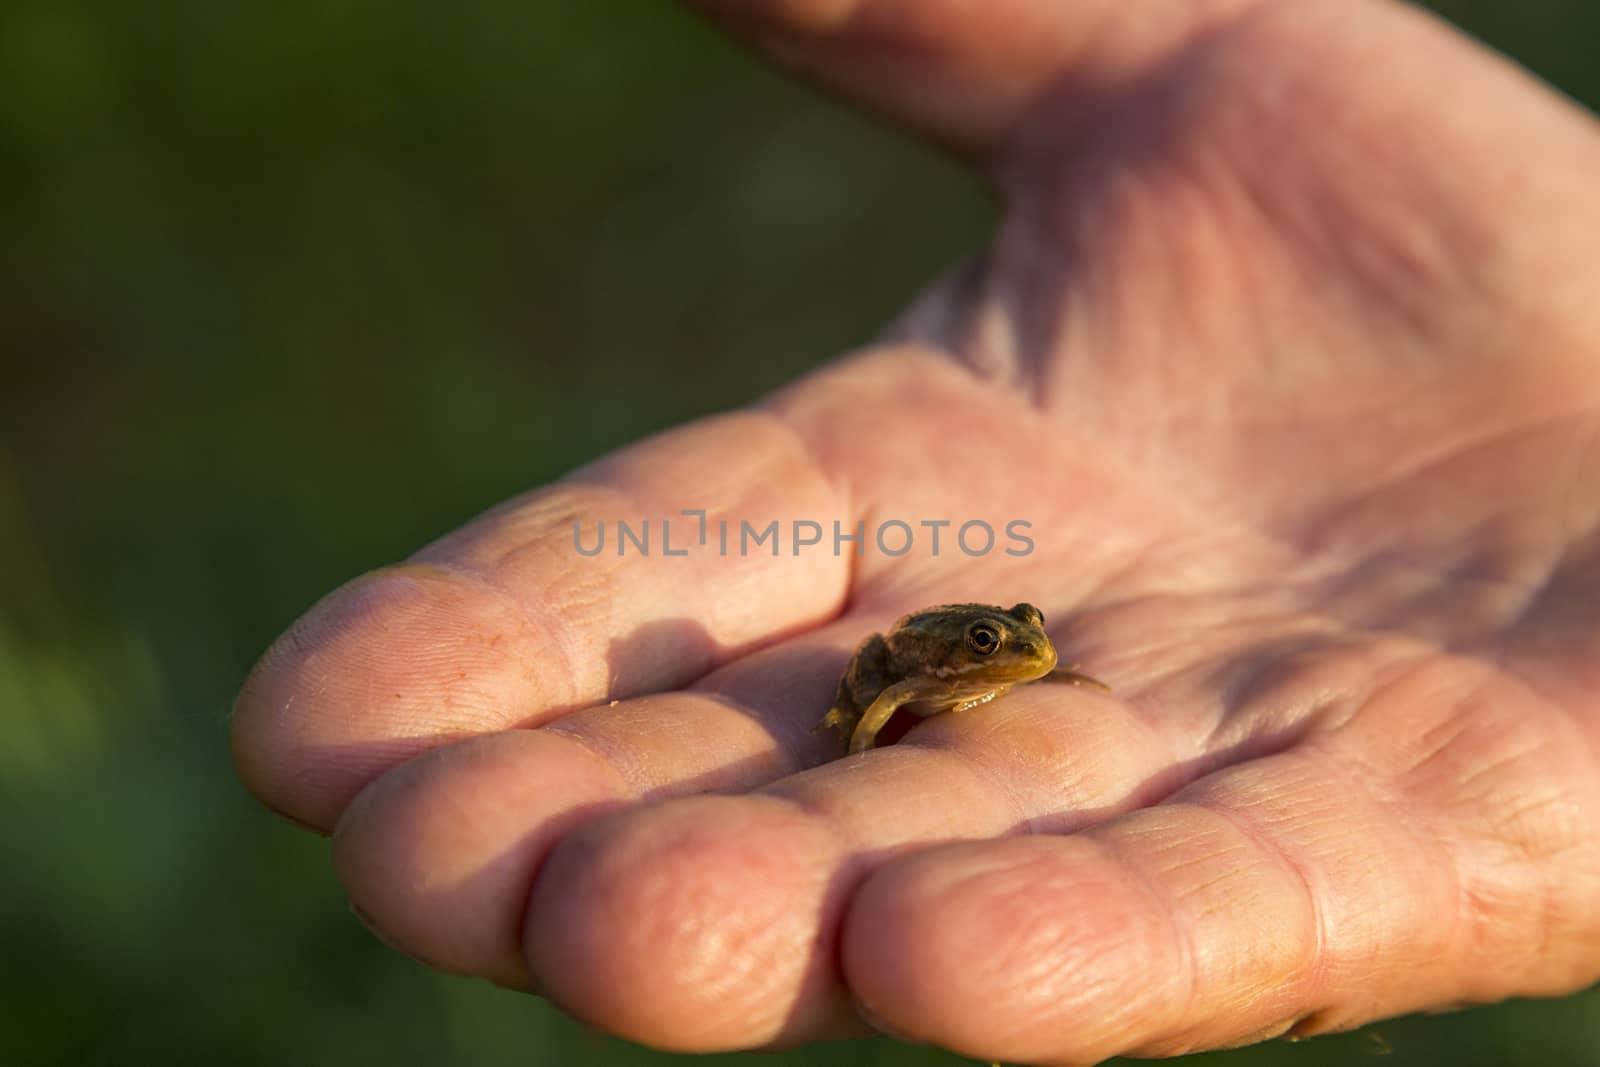 Close-up of a small frog on Franco's palm